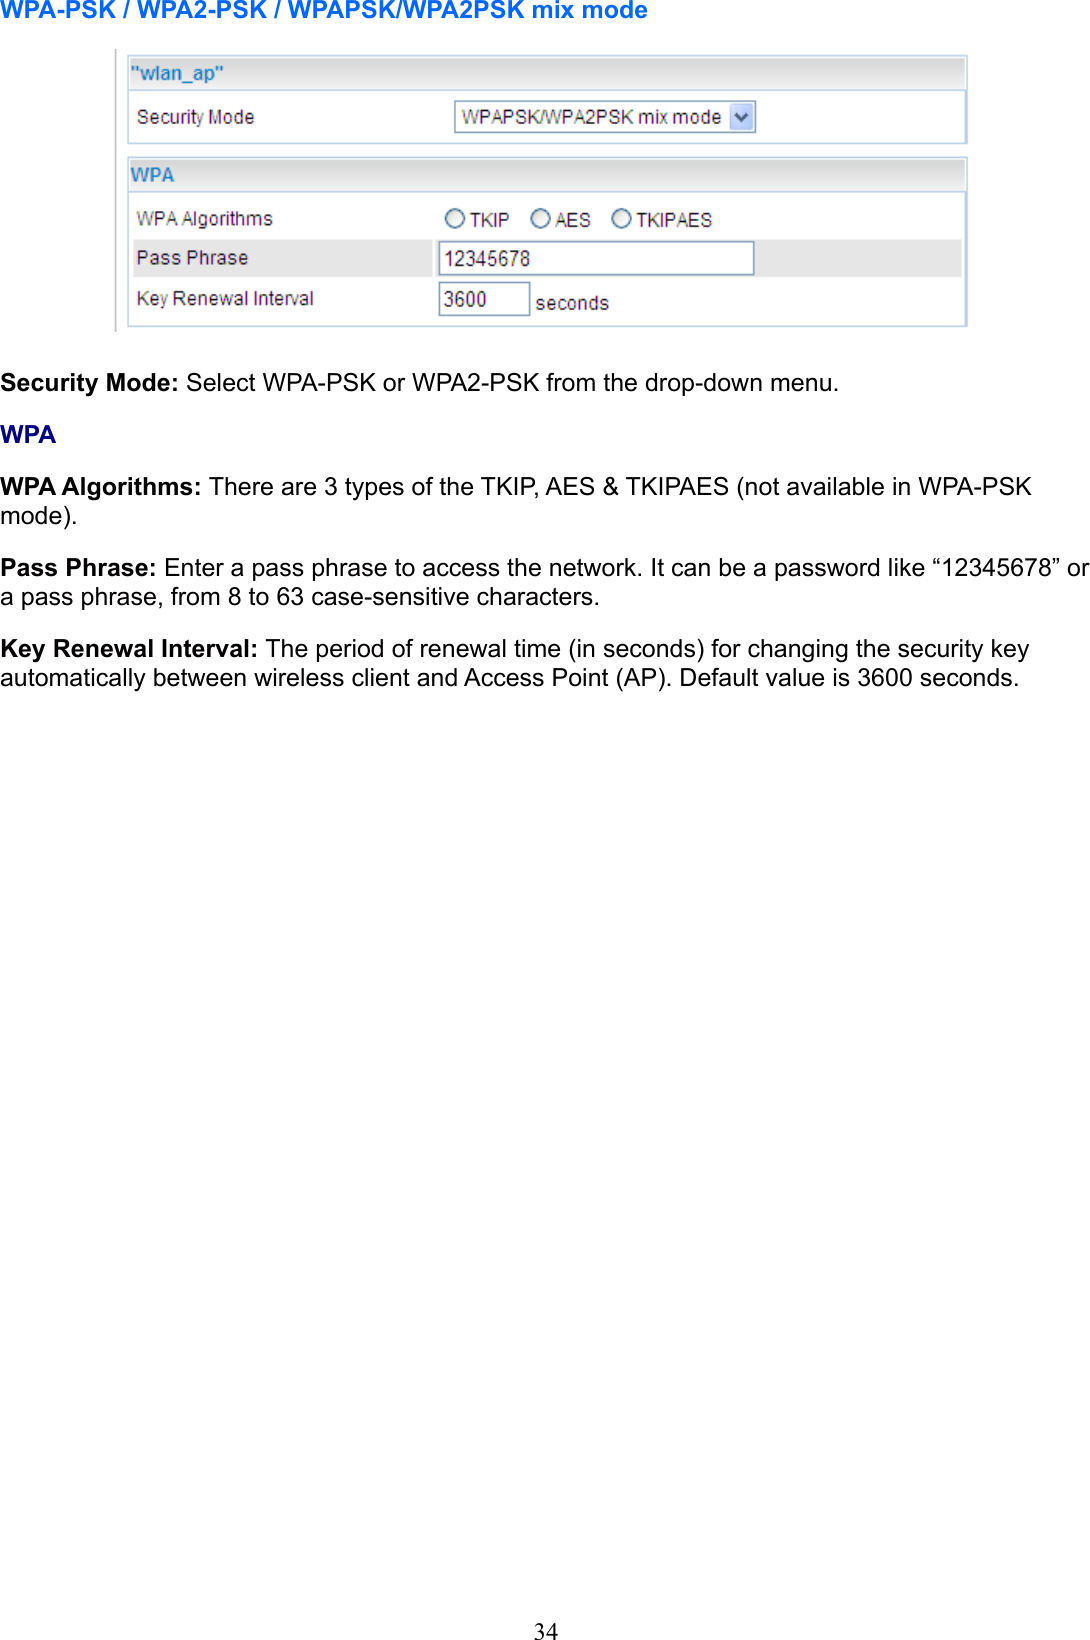 34WPA-PSK / WPA2-PSK / WPAPSK/WPA2PSK mix modeSecurity Mode: Select WPA-PSK or WPA2-PSK from the drop-down menu.WPAWPA Algorithms: There are 3 types of the TKIP, AES &amp; TKIPAES (not available in WPA-PSK  mode). Pass Phrase: Enter a pass phrase to access the network. It can be a password like “12345678” or a pass phrase, from 8 to 63 case-sensitive characters.Key Renewal Interval: The period of renewal time (in seconds) for changing the security key automatically between wireless client and Access Point (AP). Default value is 3600 seconds.